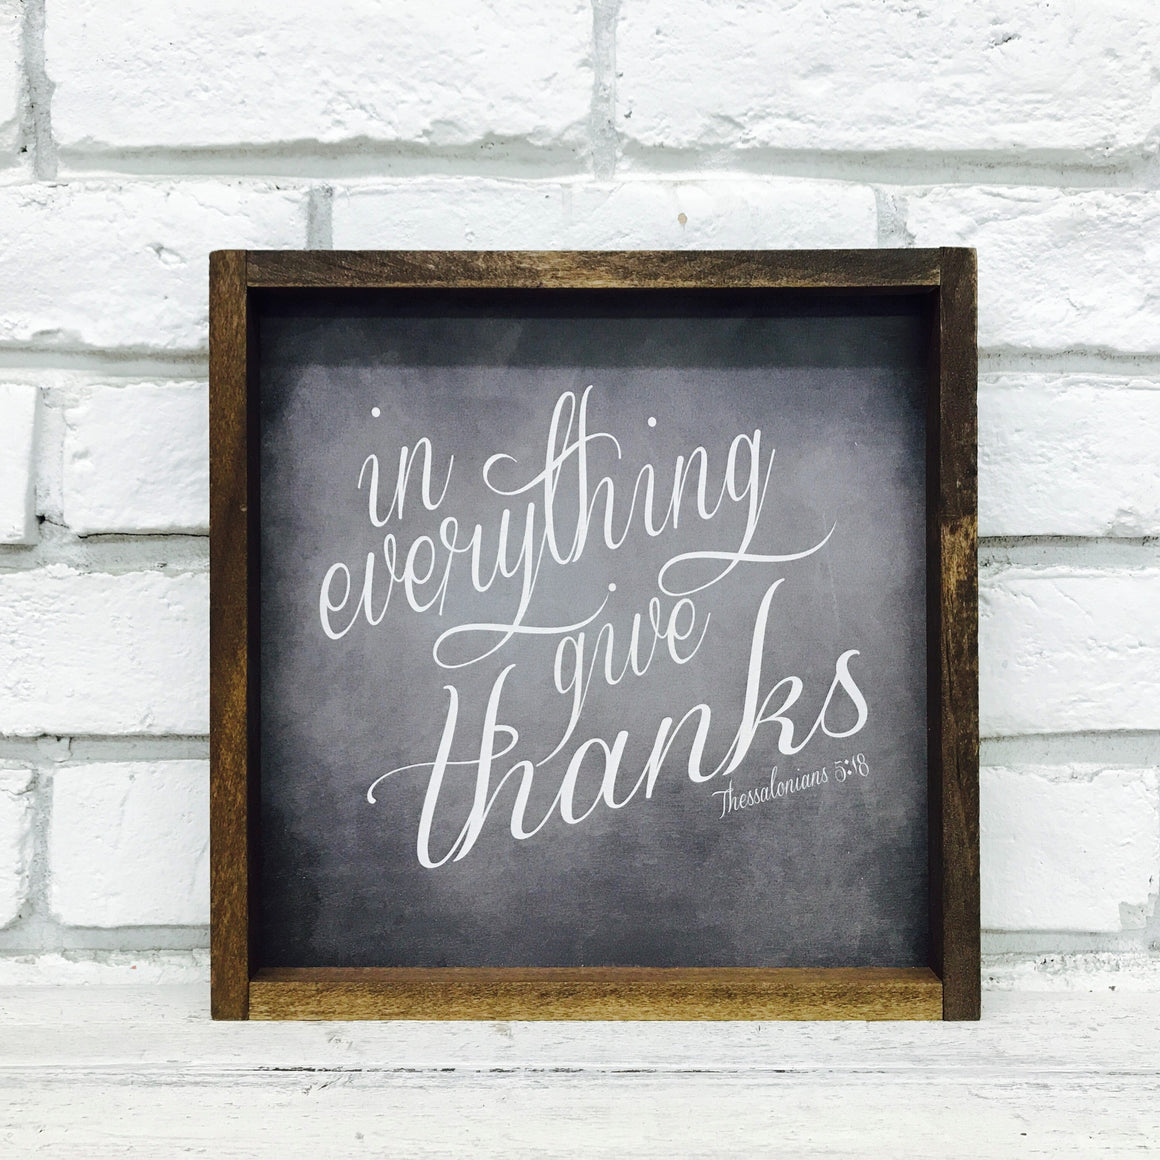 "In Everything Give Thanks" Wooden Sign